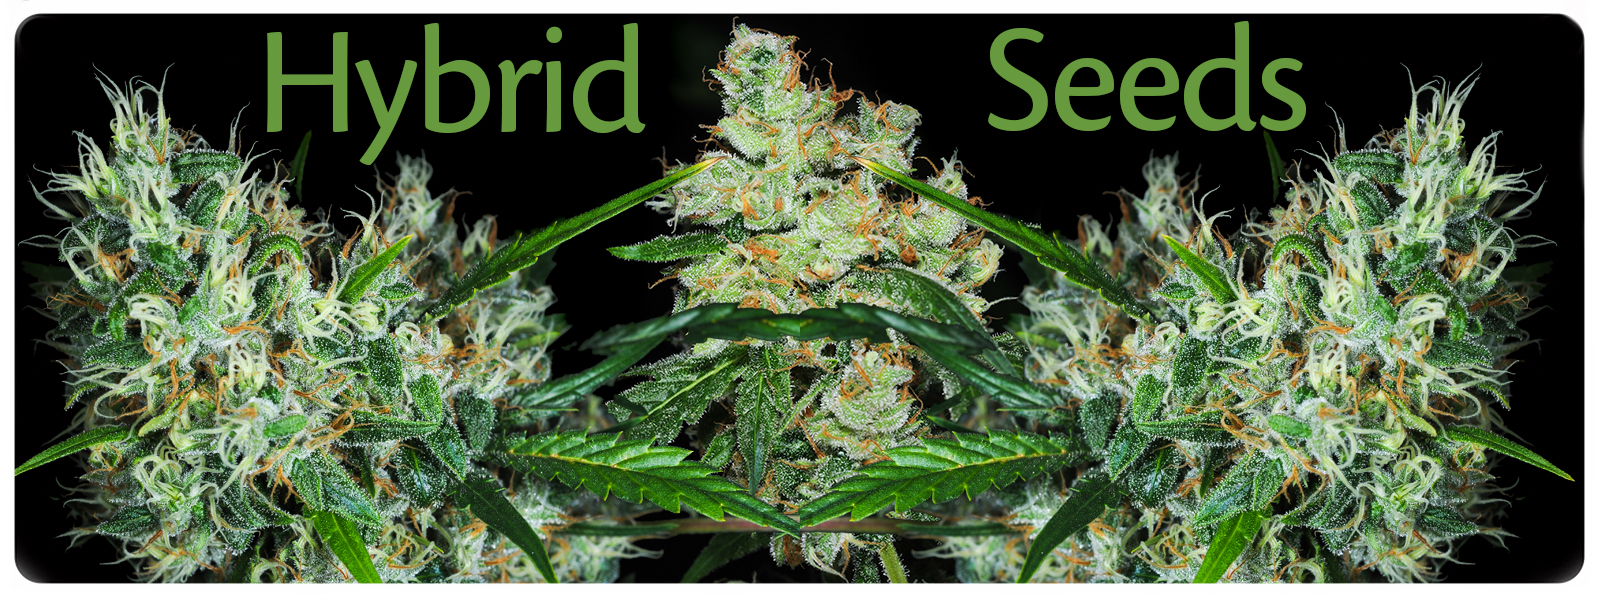 Hybrid cannabis seeds for the sativa and indica lover, marijuana with the best of both worlds